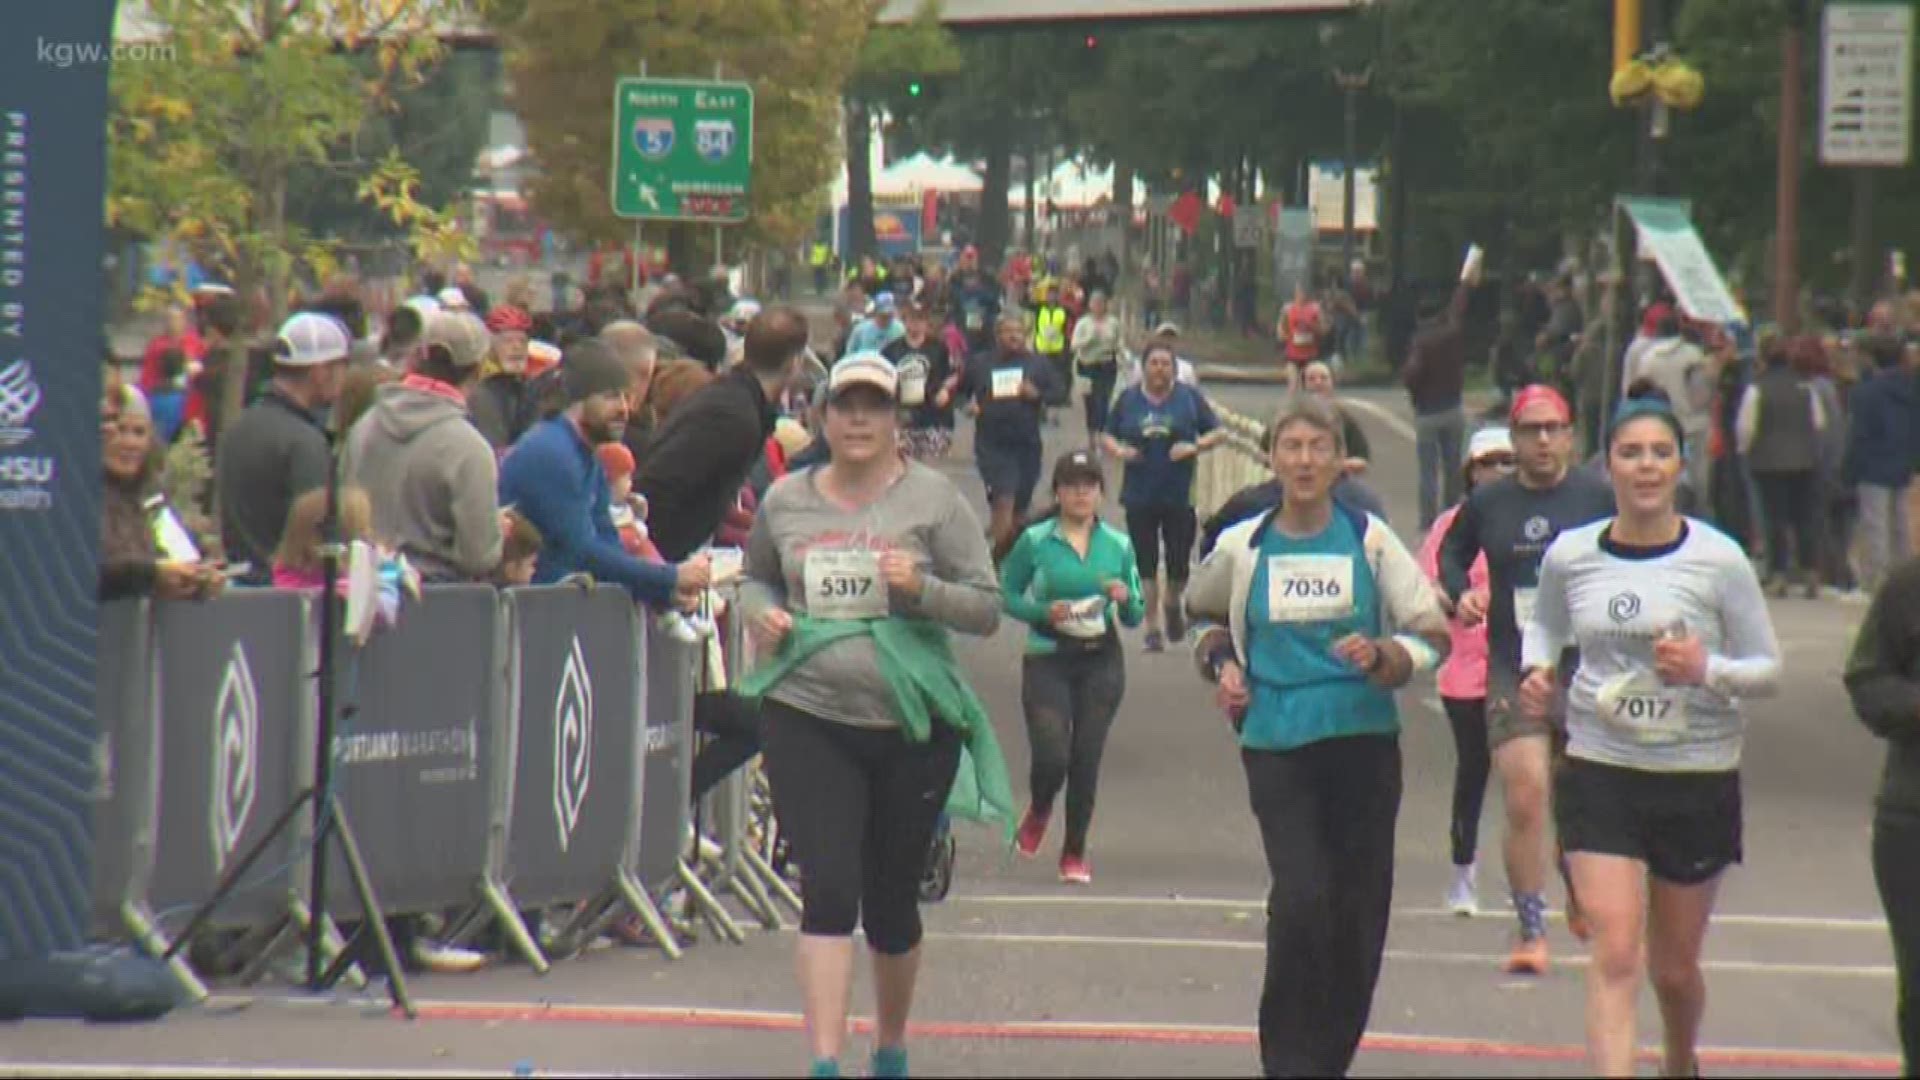 A group of about 15 top runners ended up taking a wrong turn Sunday at the Portland Marathon, adding an extra 2 miles of hills just to get back on course.